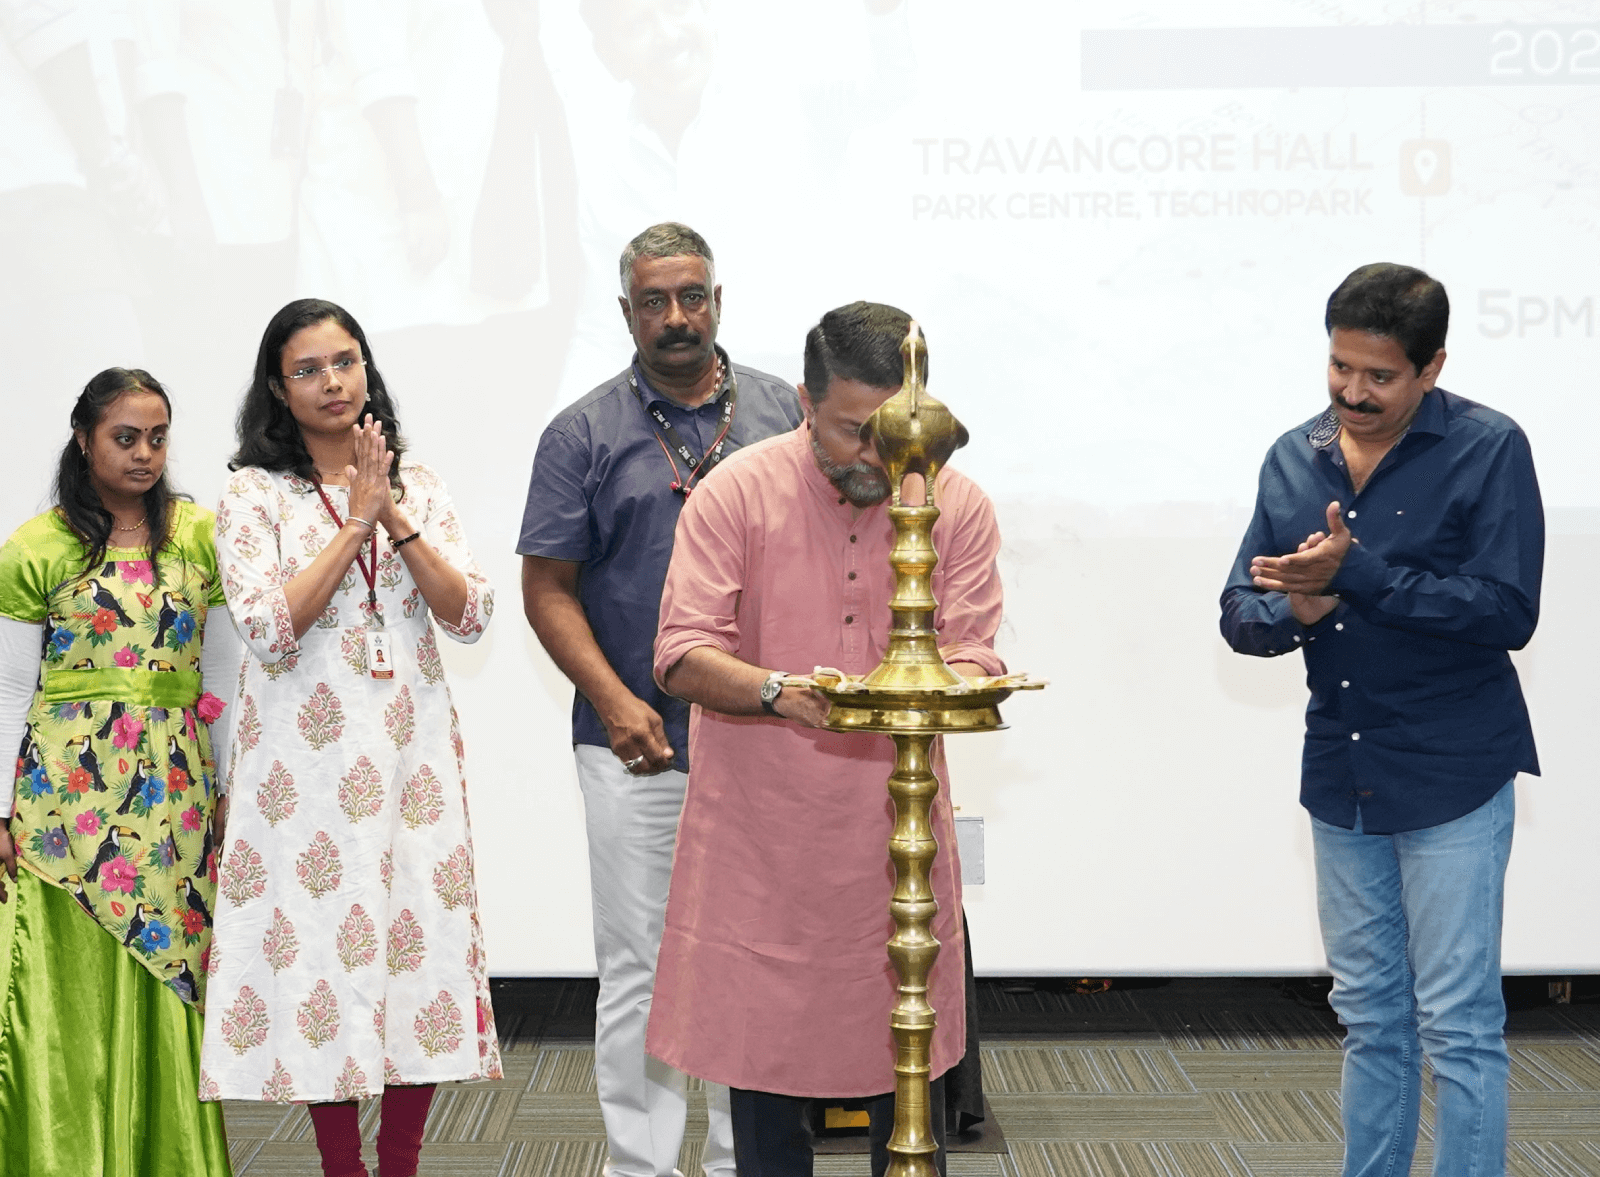 CEO Technopark, Col Sanjeev Nair (Retd.) inaugurating the Unified Voices event at Technopark by lighting the auspicious lamp.